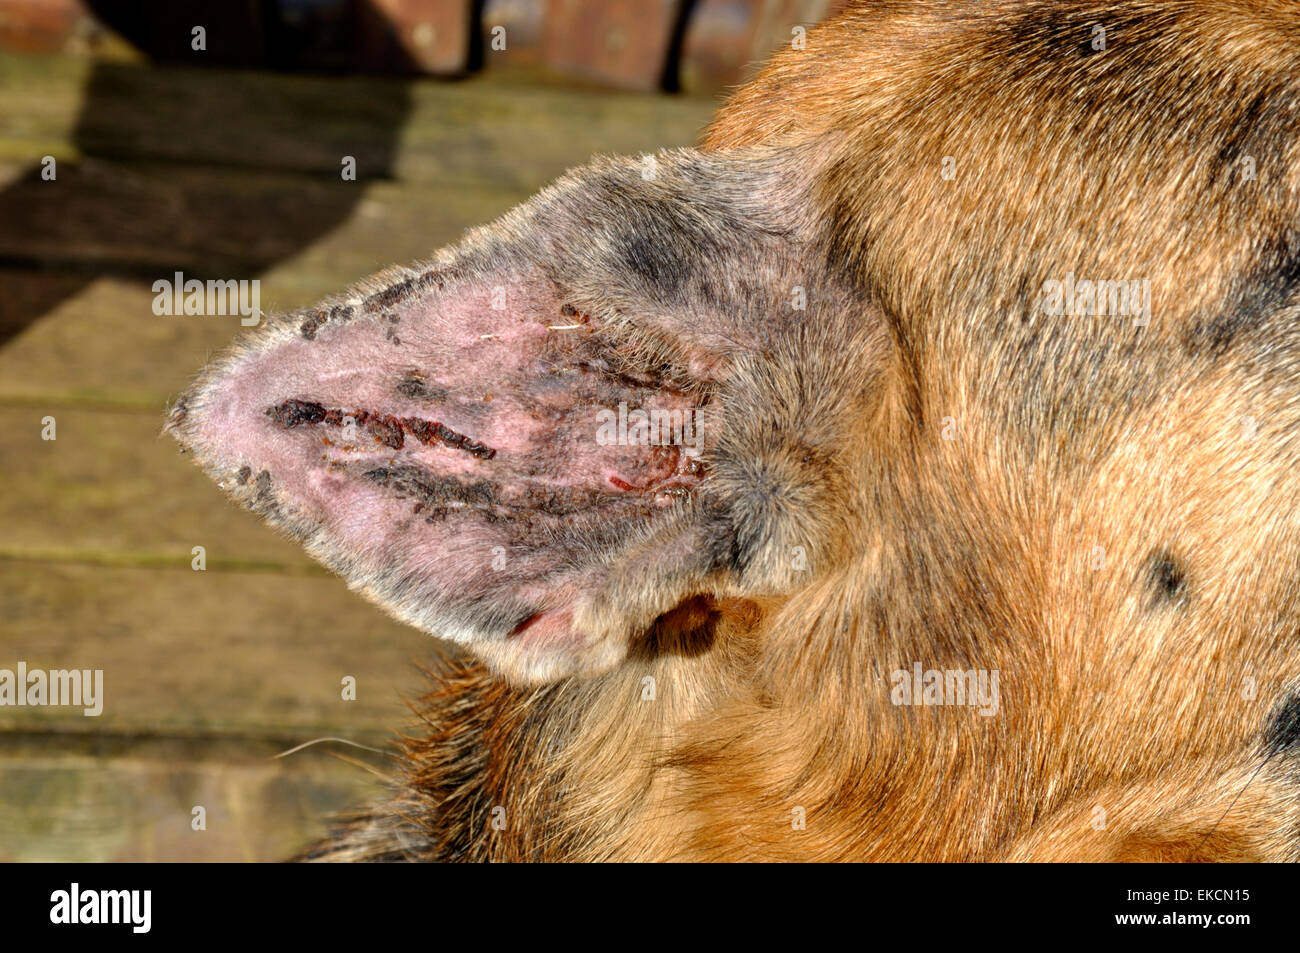 how much does dog ear hematoma surgery cost